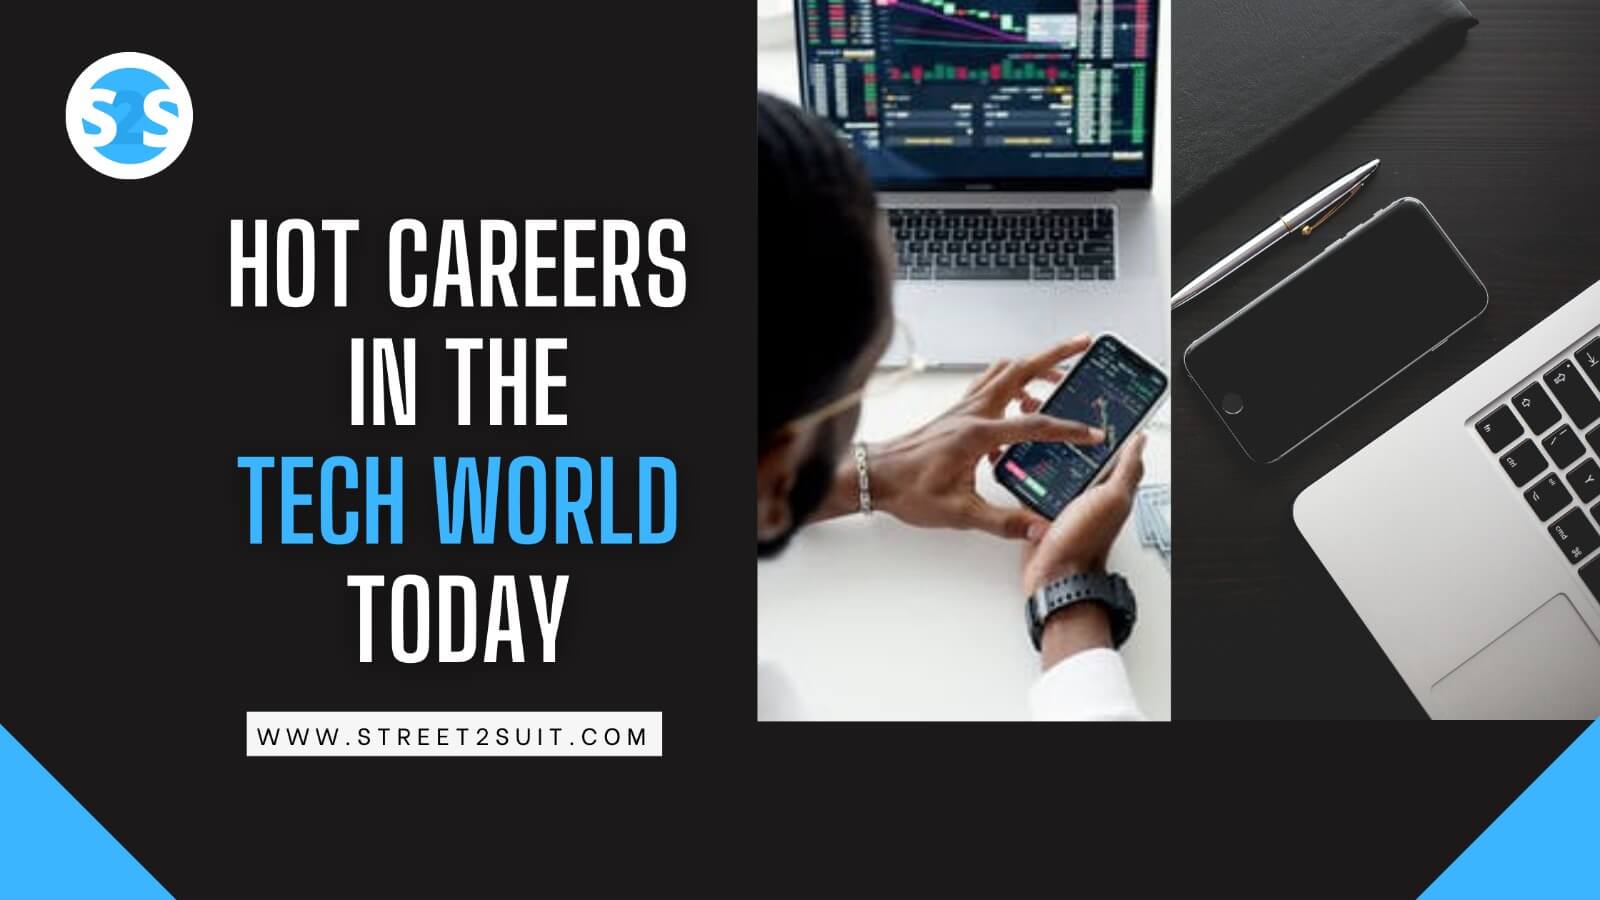 Hot Careers in the Tech World Today